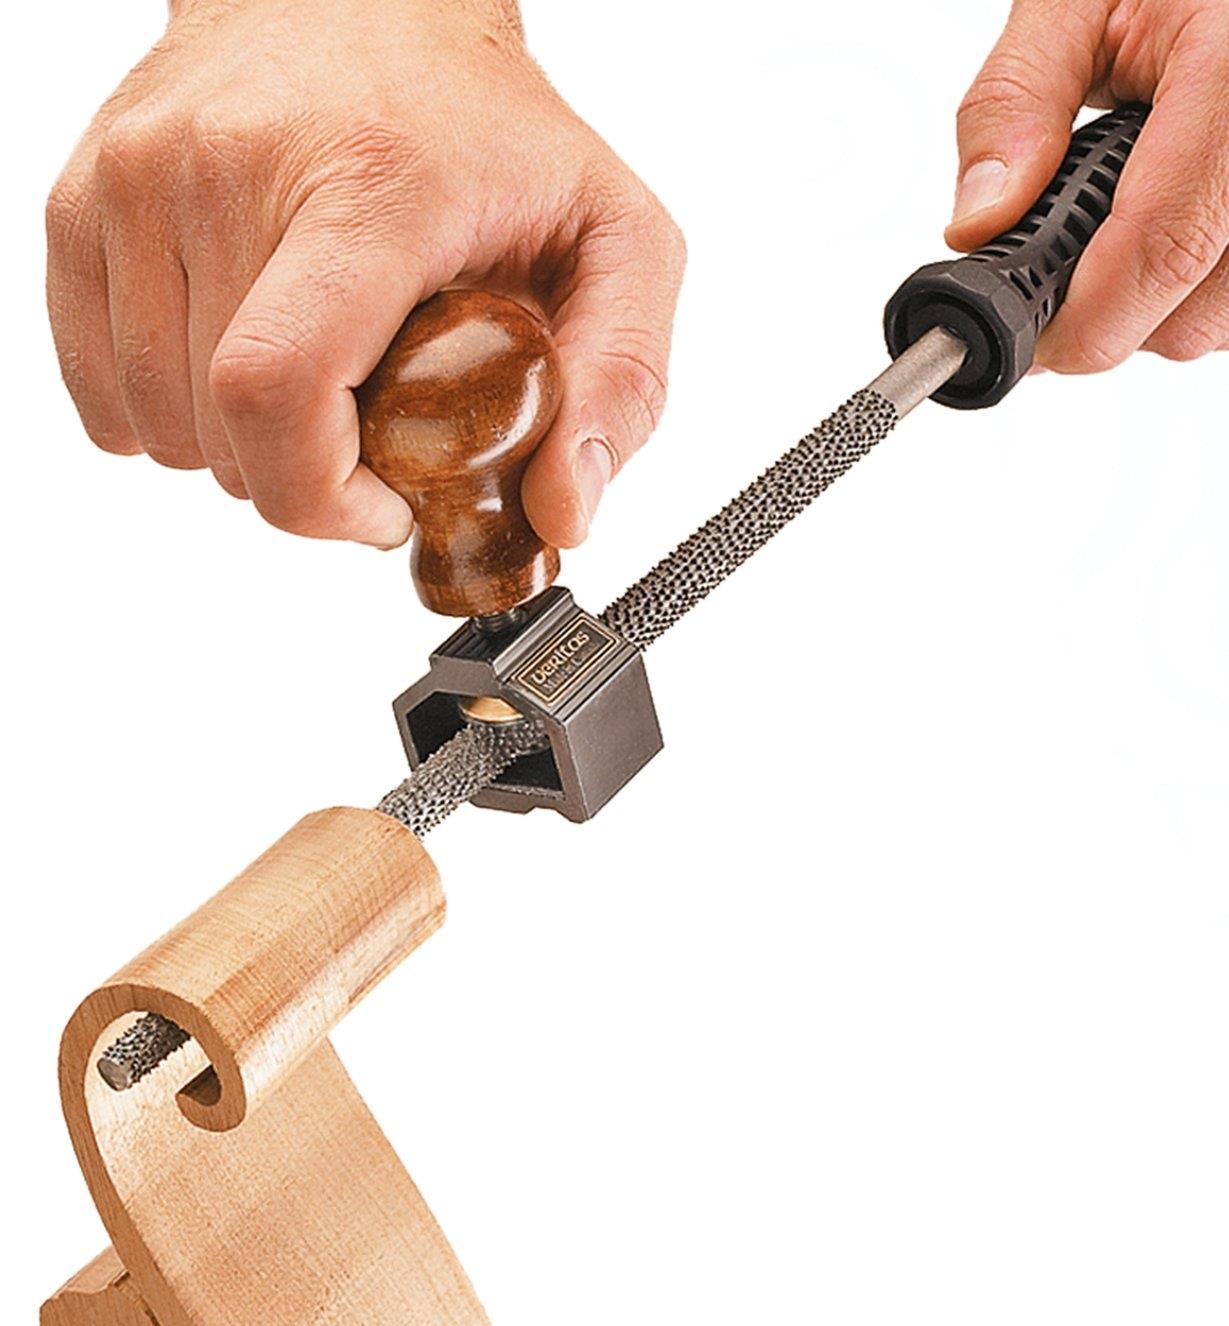 Using a rasp with the file/rasp handle to shape the inside of a wooden scroll